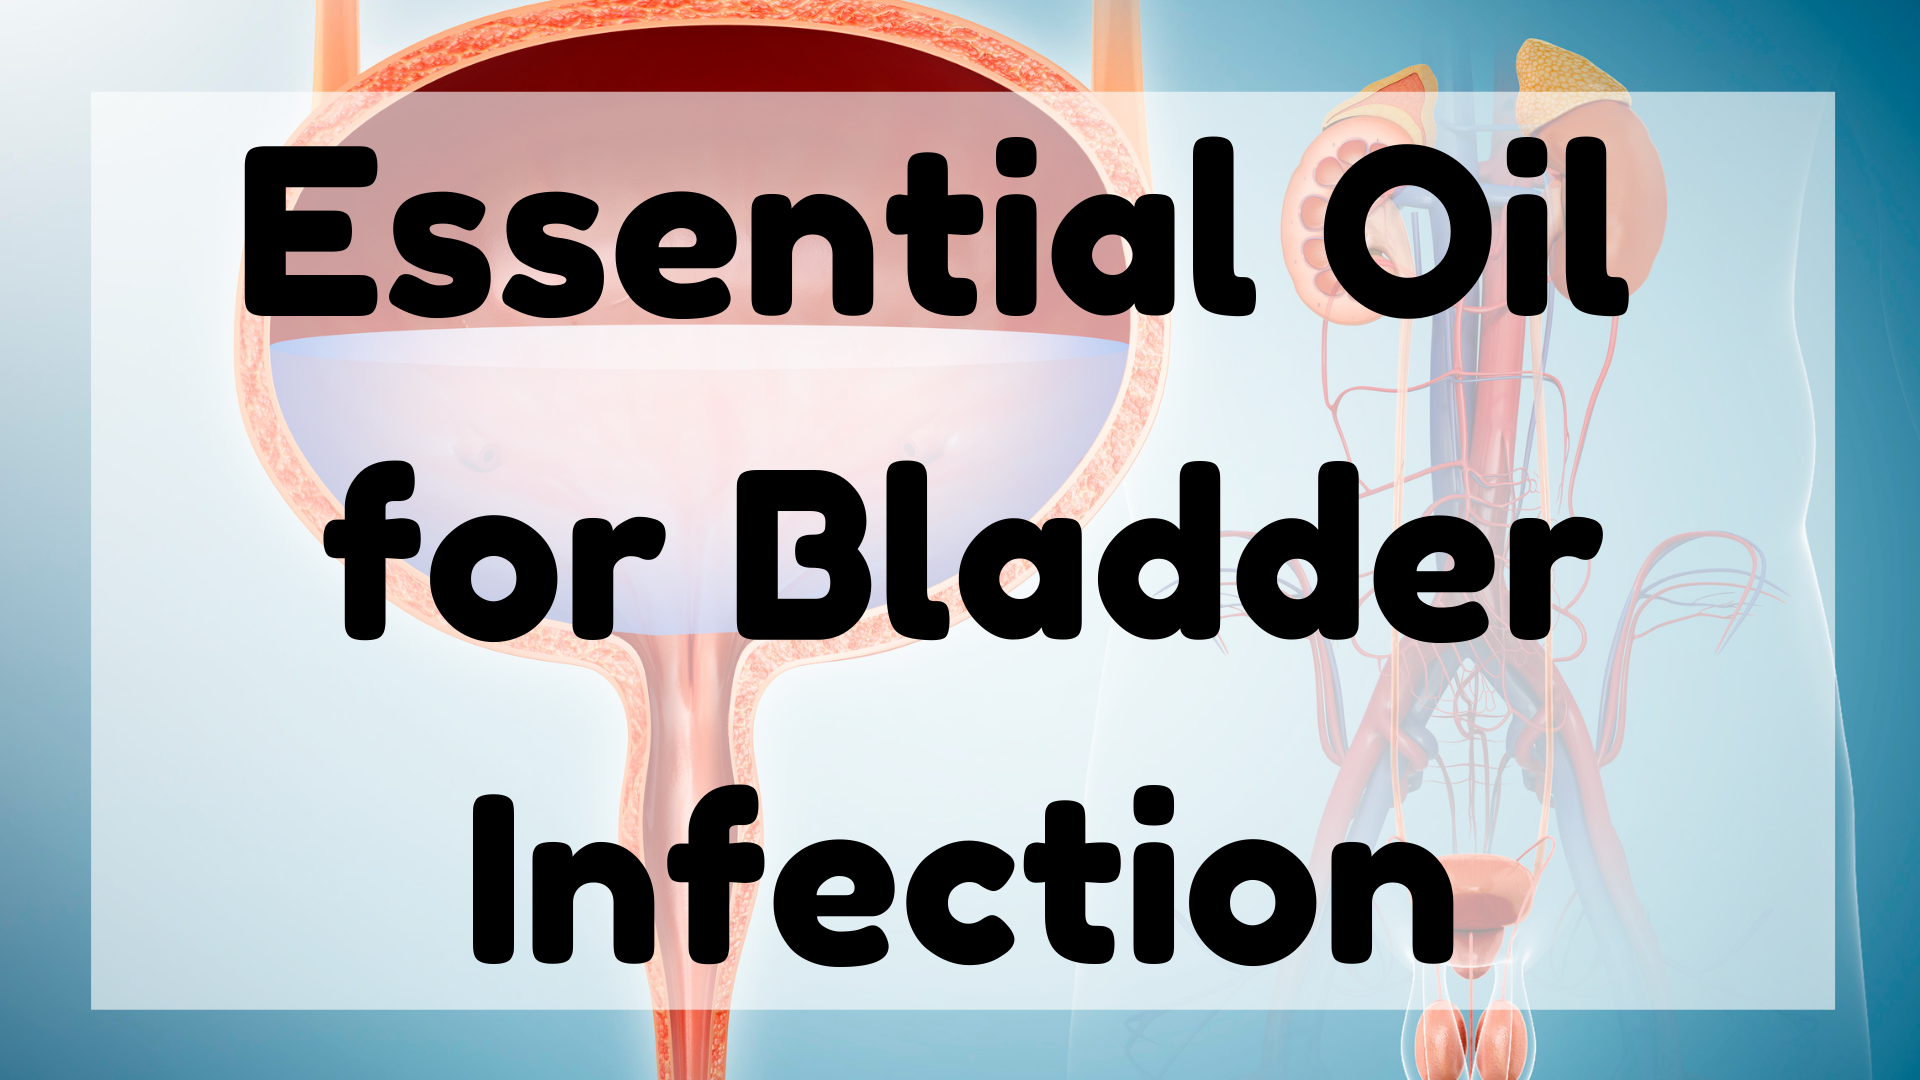 Essential Oil For Bladder Infection